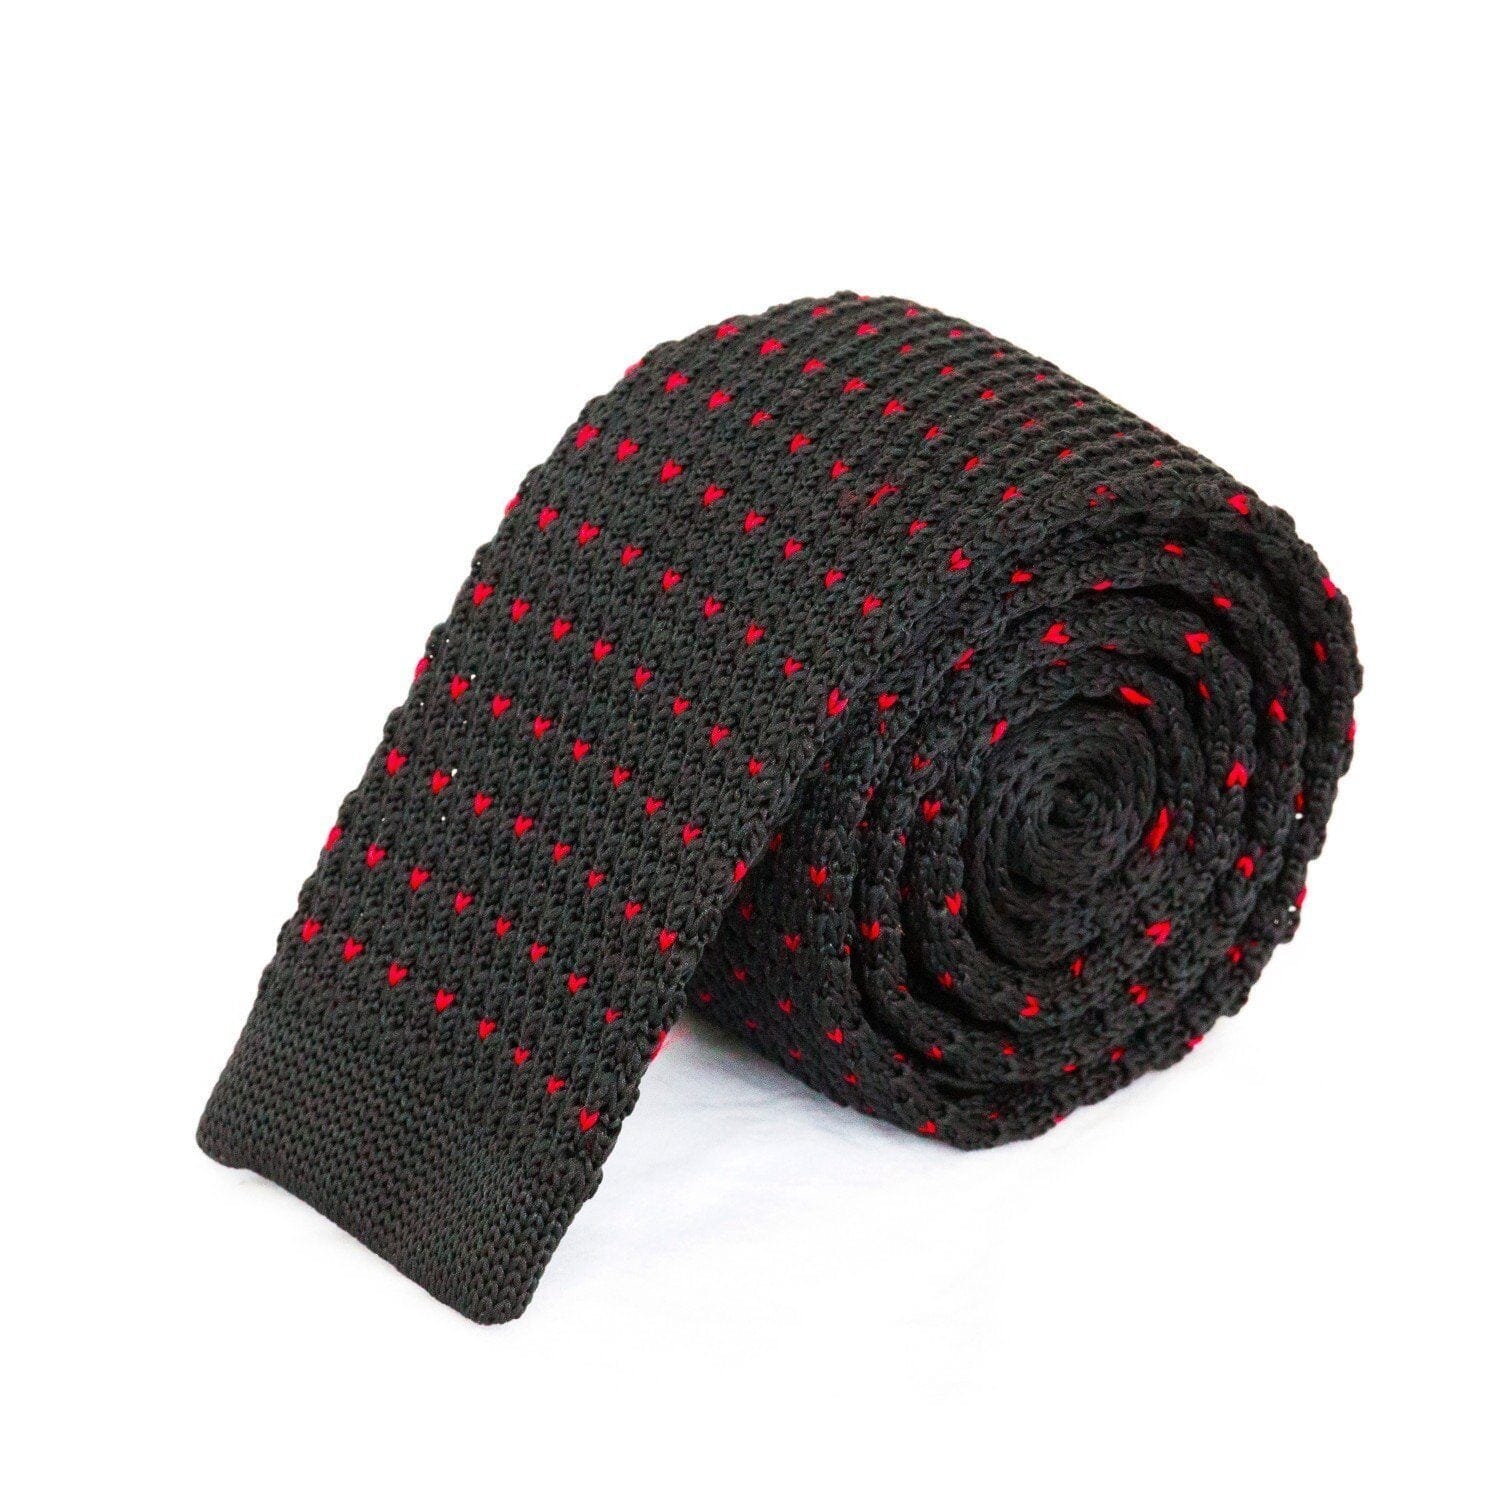 Black with Red Dot Knitted Tie Ties Cuffed.com.au 